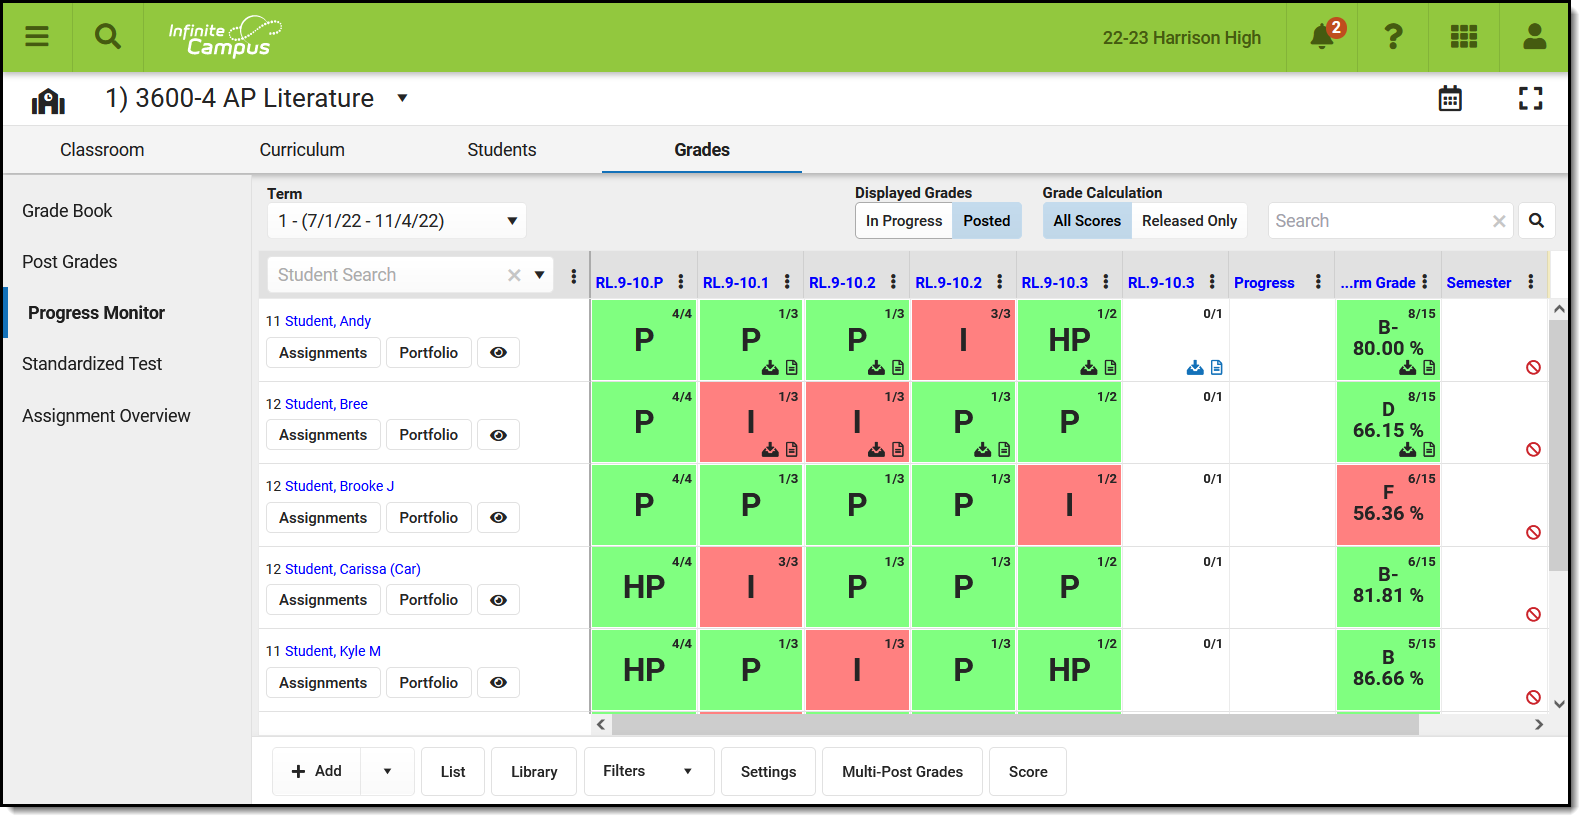 Screenshot of the Progress Monitor, with students listed along the left and the grid filled with Proficiency Estimates for the Standards indicated in the column headers. 